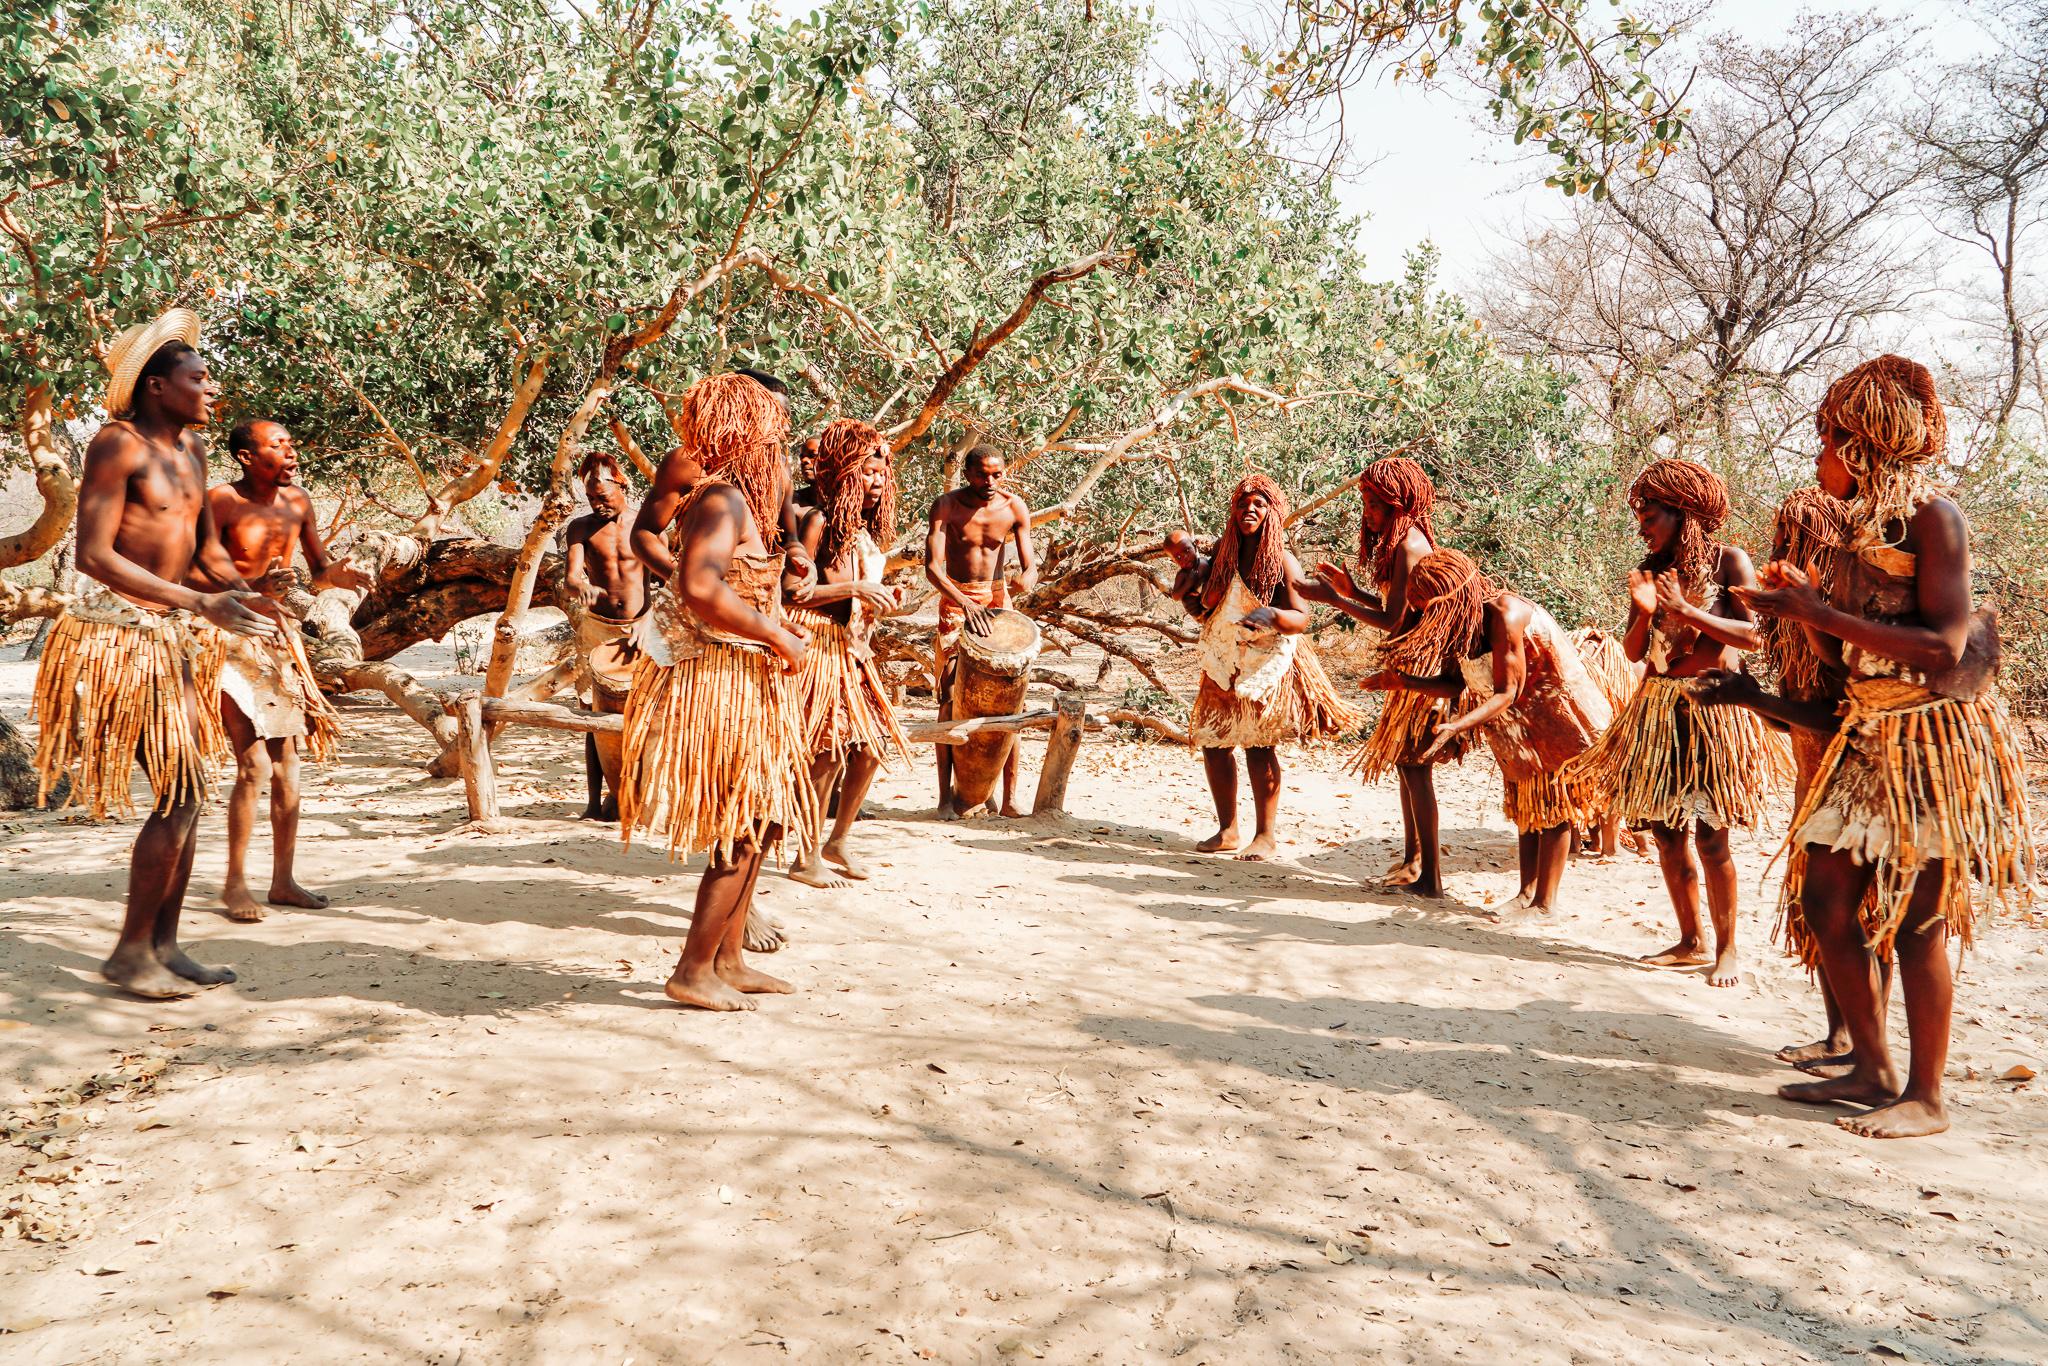 bush people in Namibia dancing outside under trees